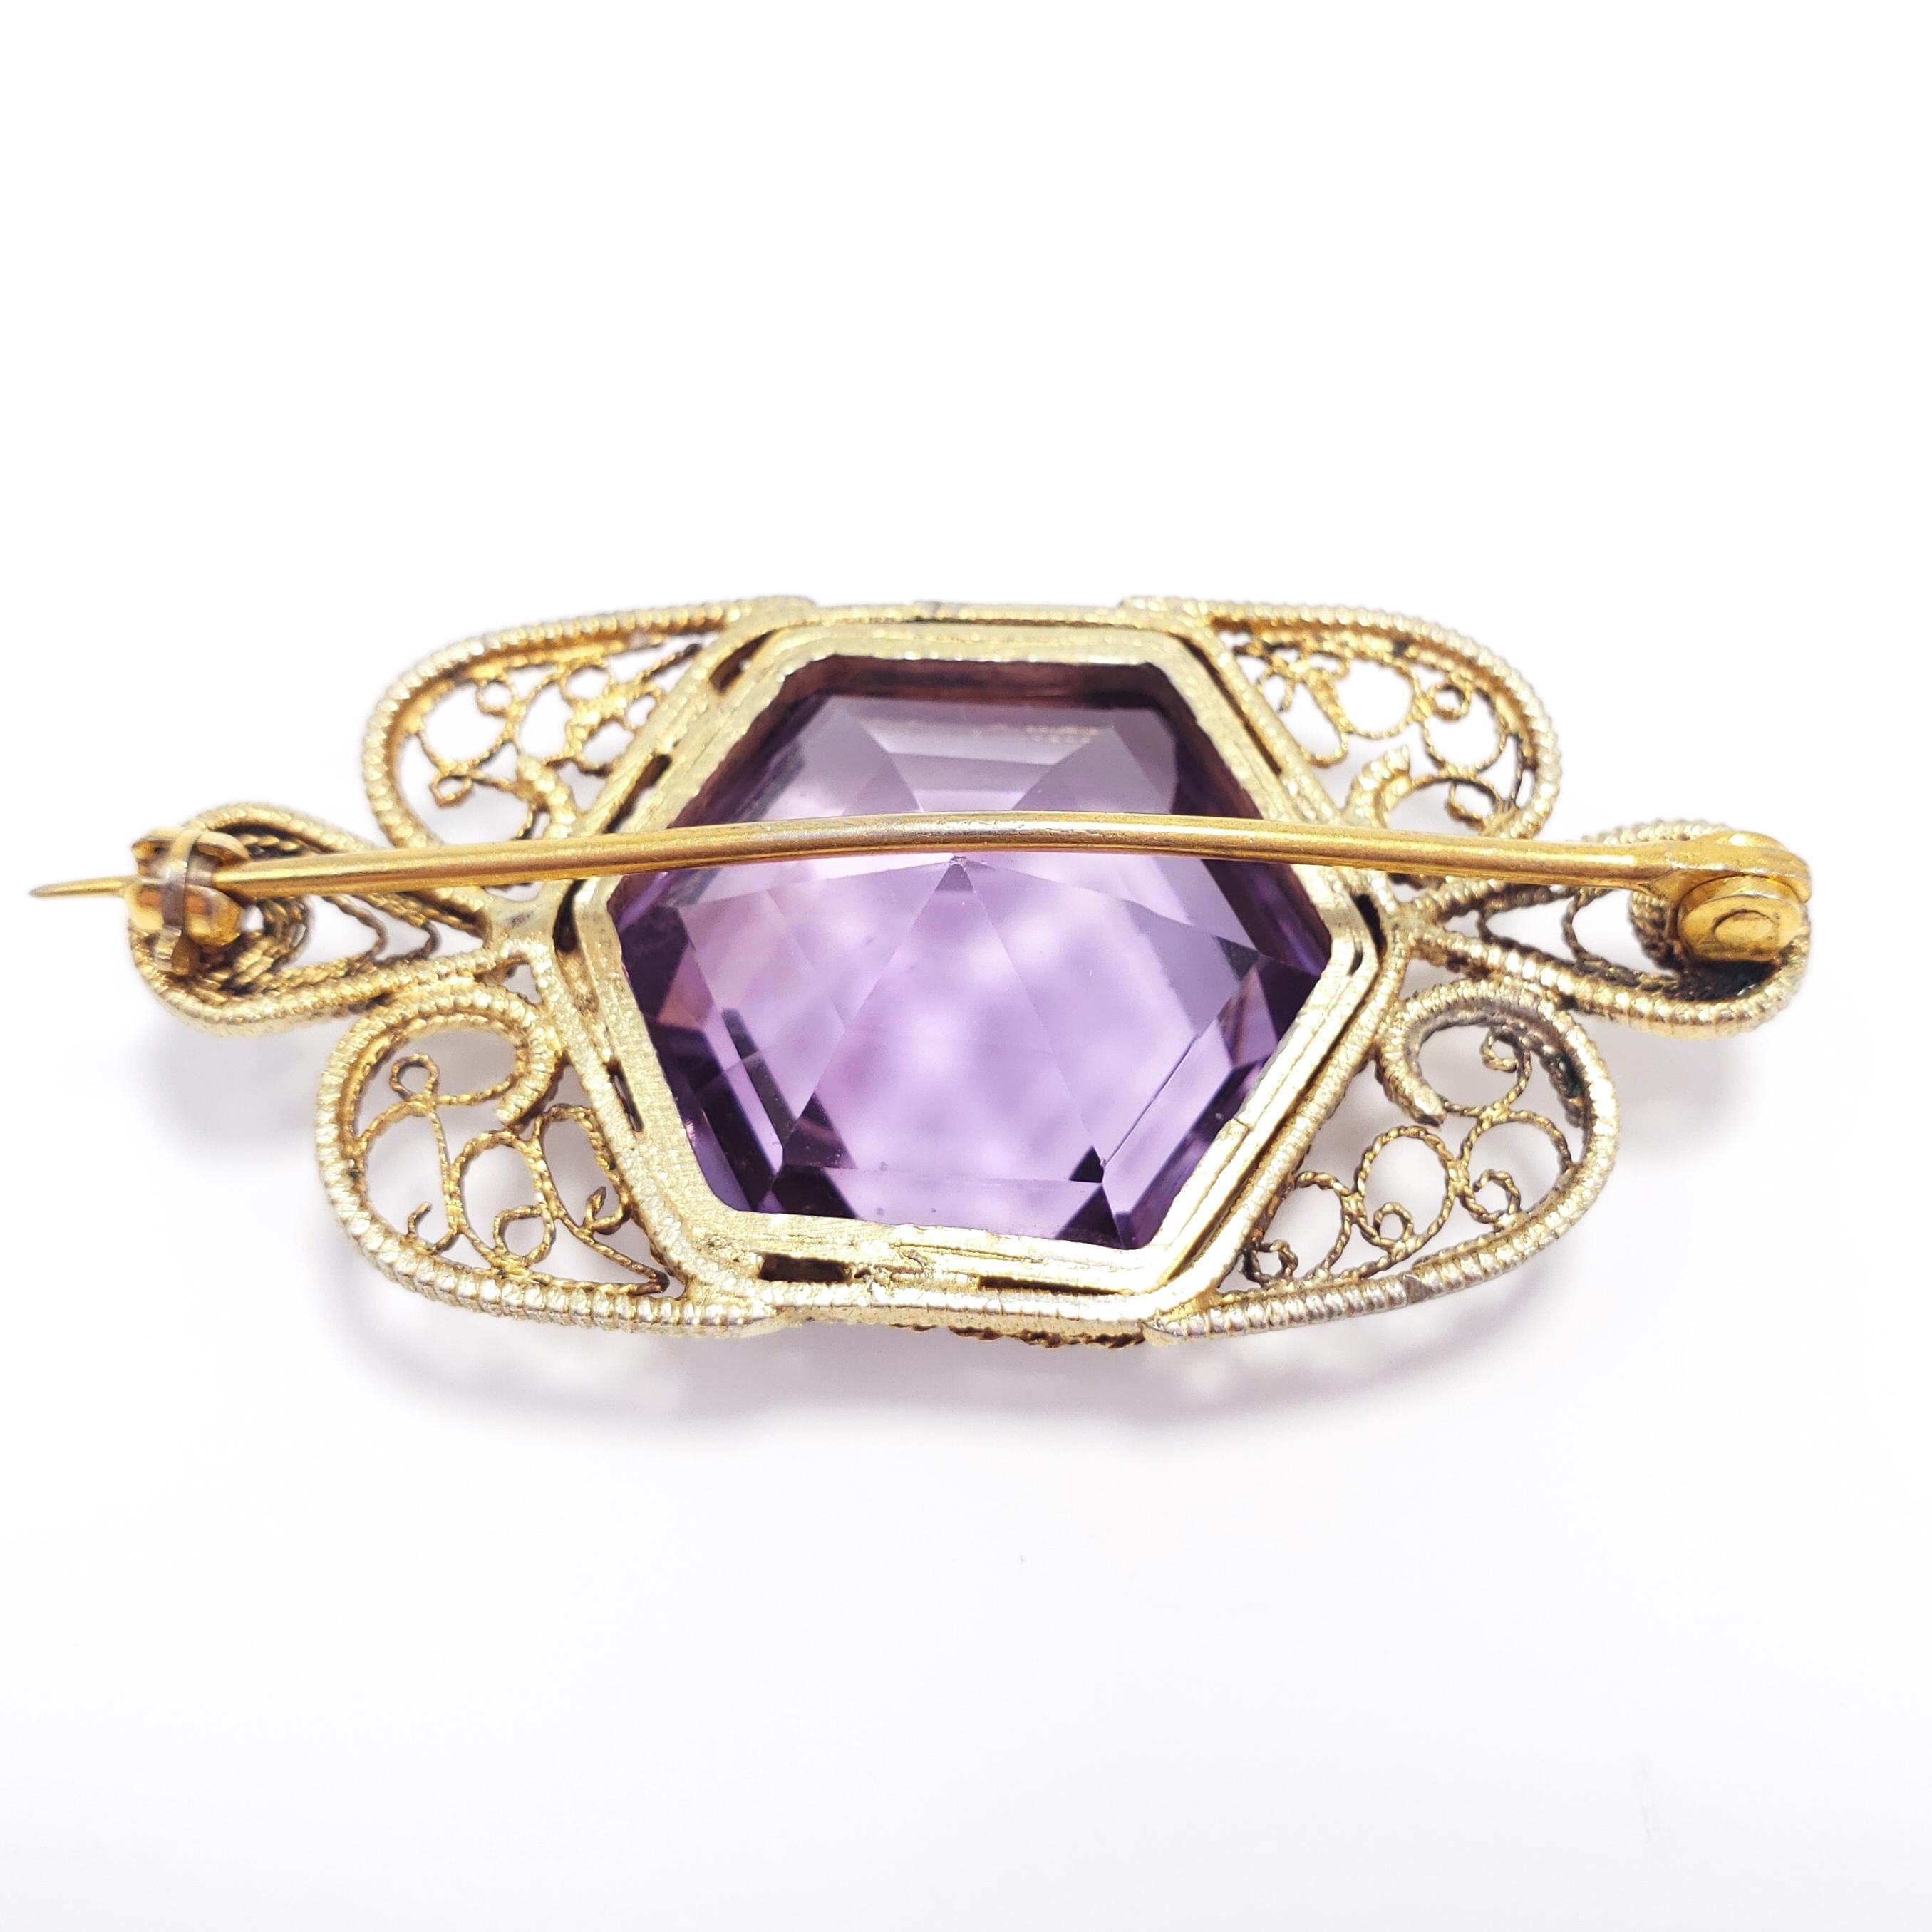 Victorian Art Nouveau Amethyst Pin Brooch in Vermeil Filigree Setting, 1920s  In Excellent Condition For Sale In Milford, DE